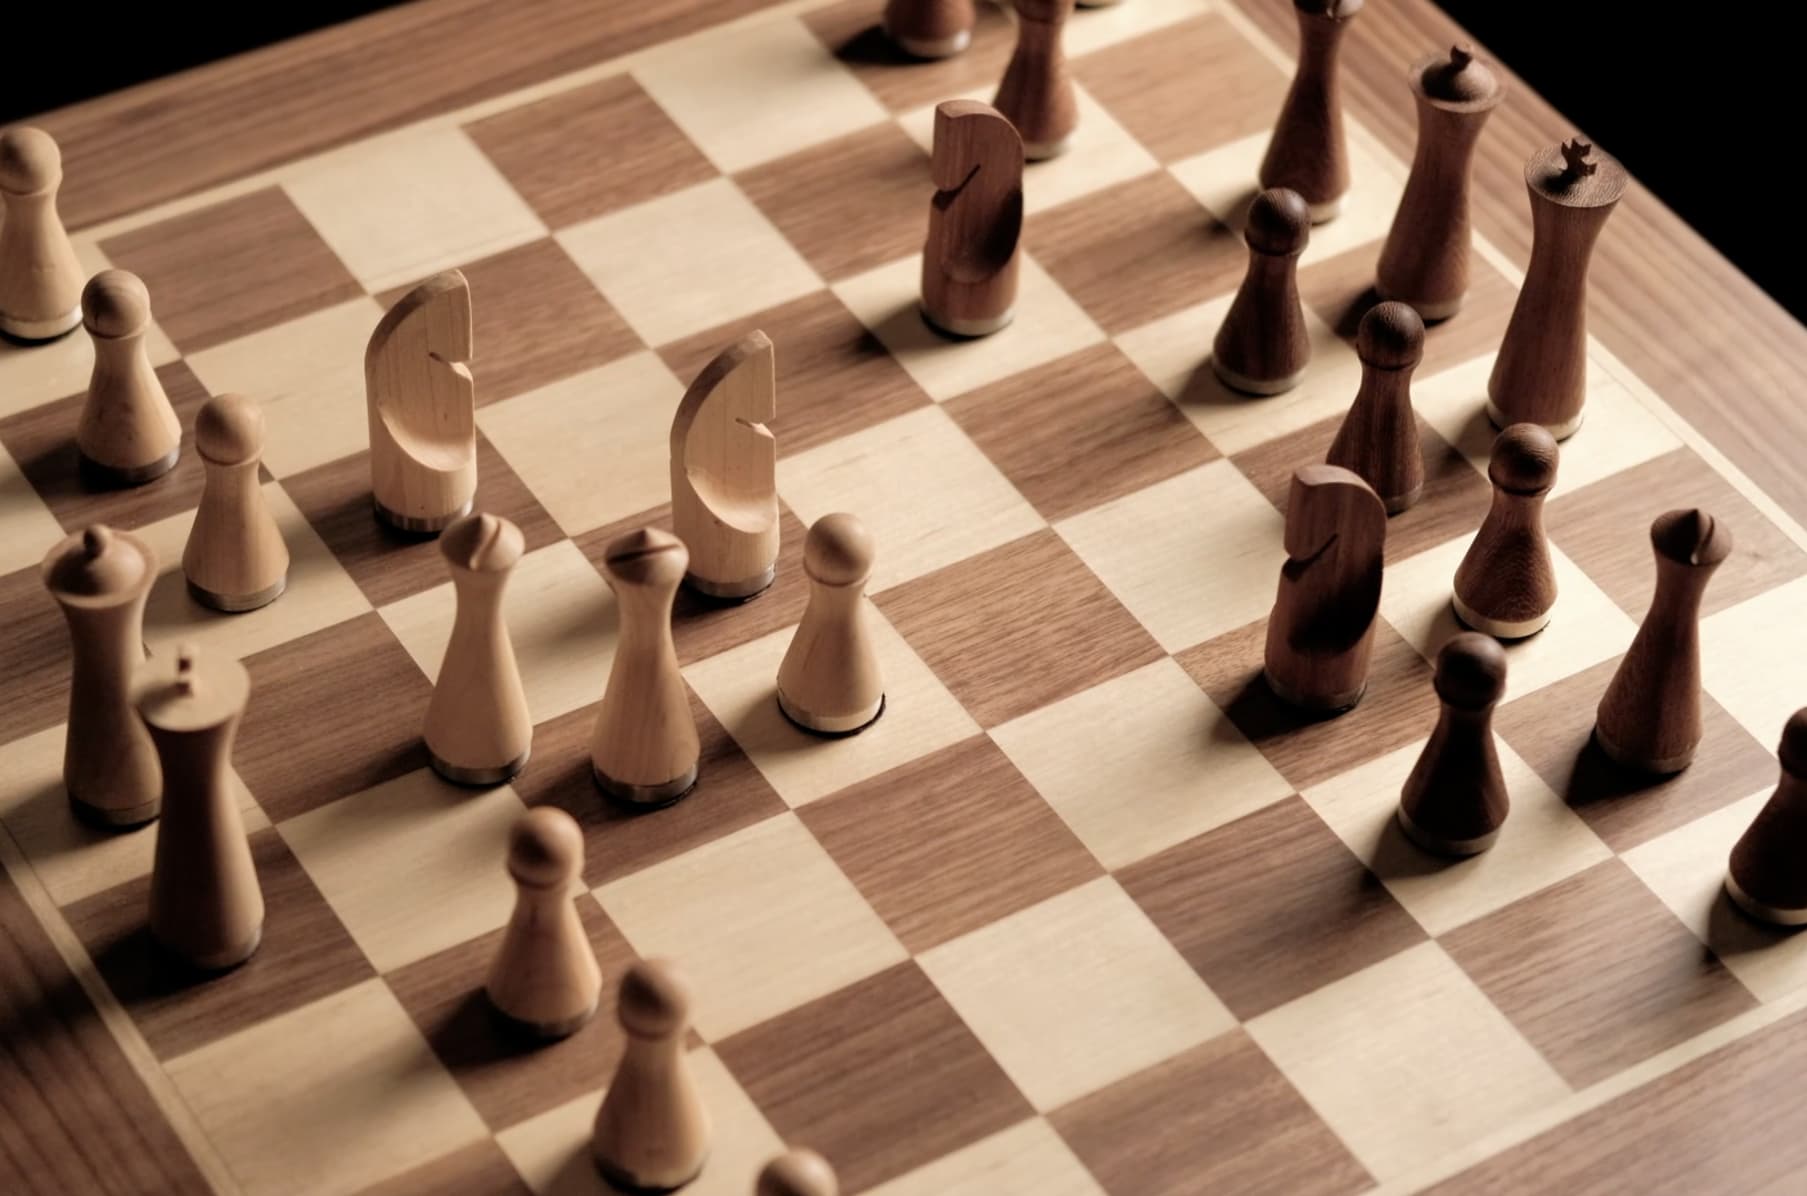 PHANTOM. The Robotic Chessboard Made of Real Wood